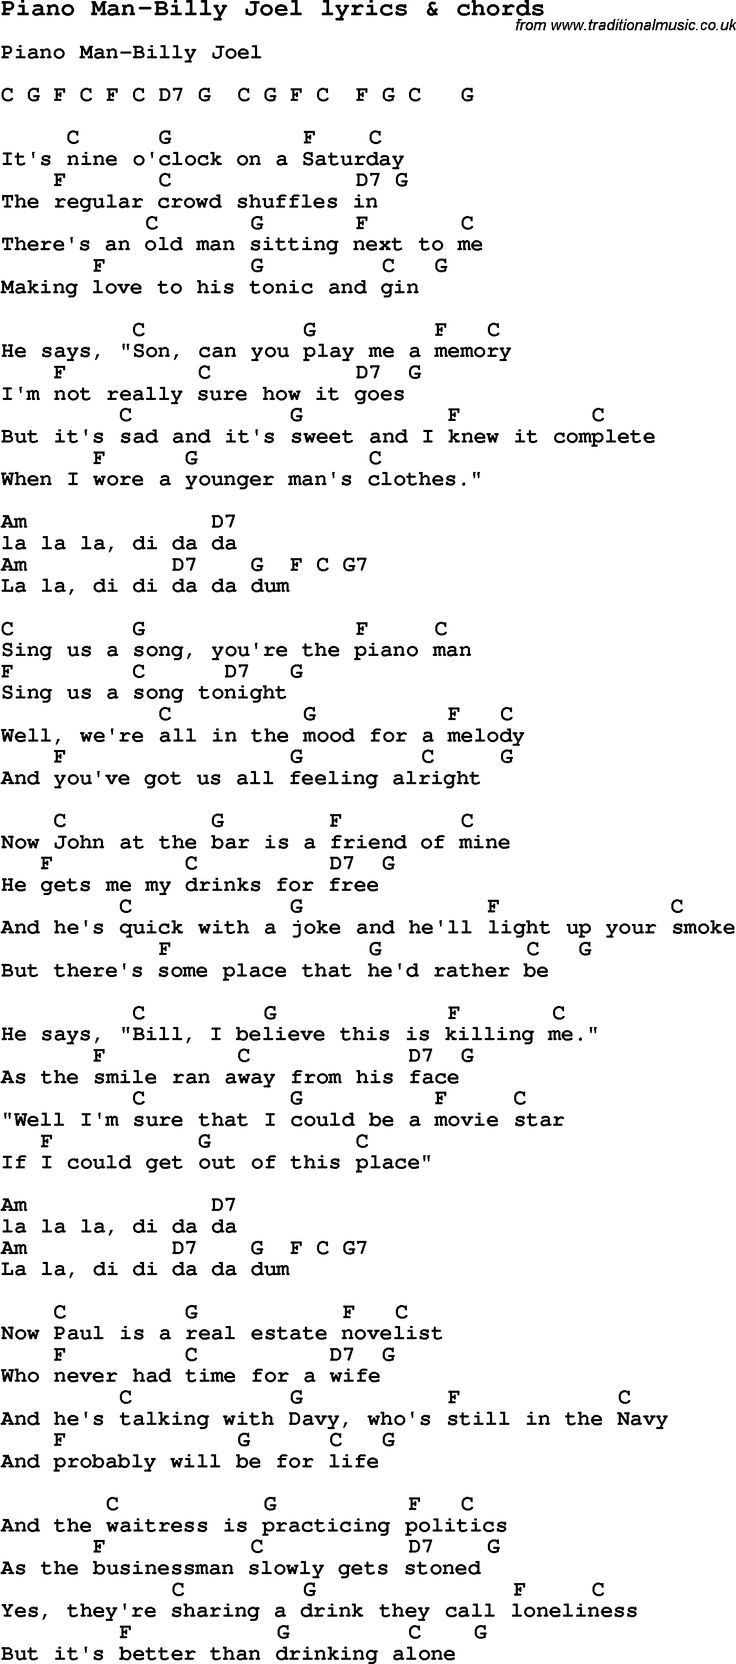 George Strait Christmas Cookies Lyrics
 Love Song Lyrics for Piano Man Billy Joel with chords for